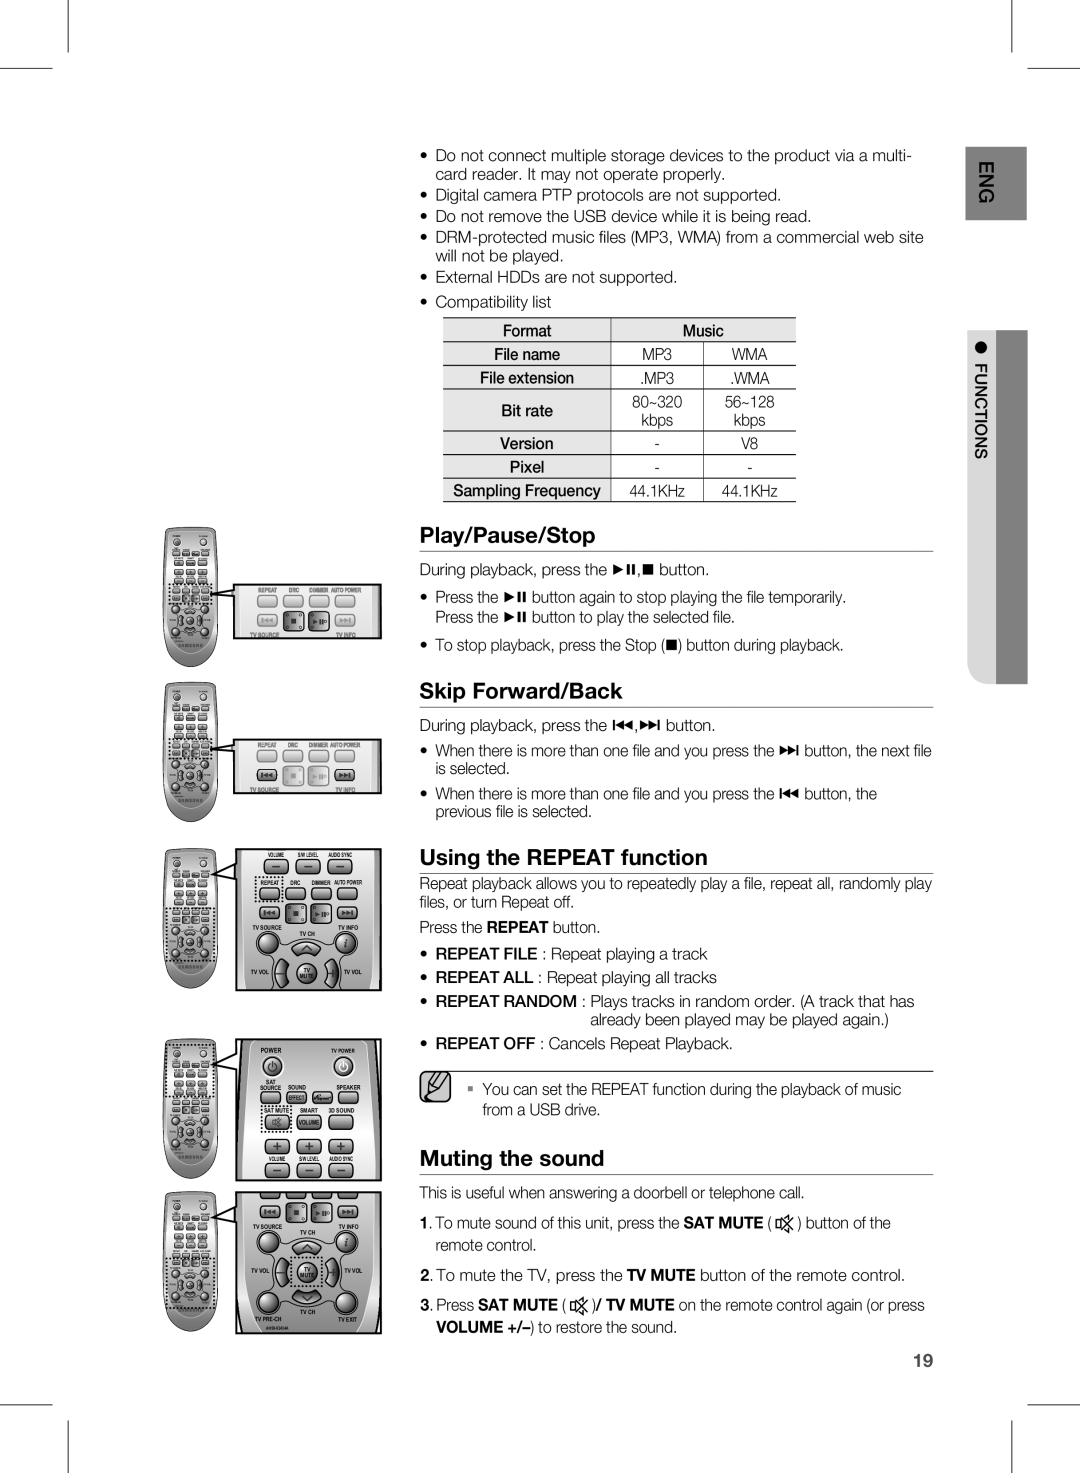 Samsung HW-E450 user manual Play/Pause/Stop, Skip Forward/Back, Using the REPEAT function, Muting the sound 